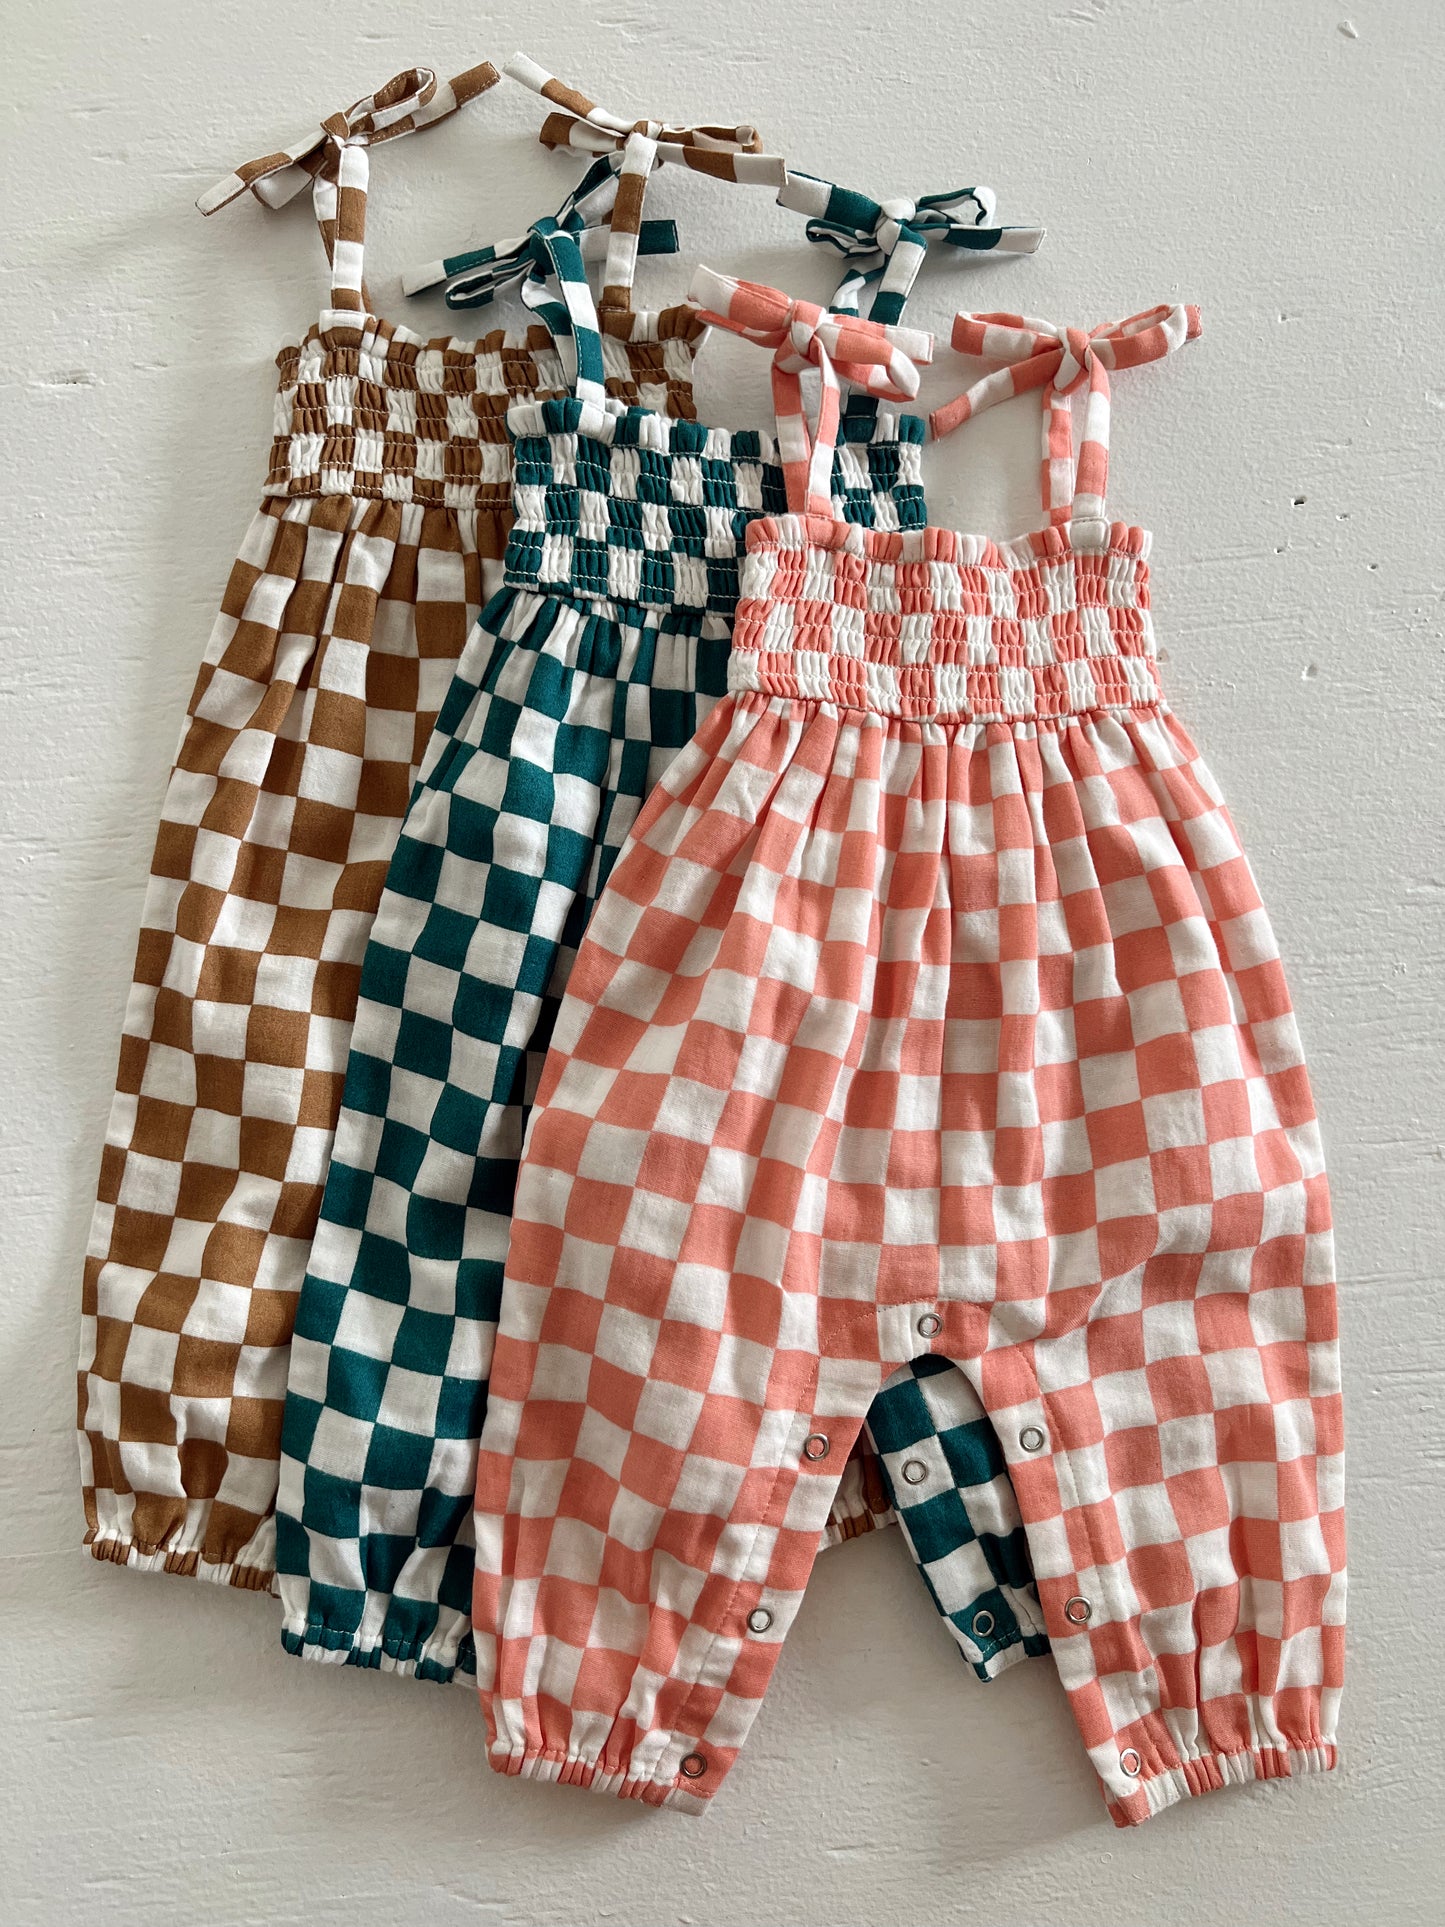 Pacific Checkerboard / Organic Smocked Jumpsuit